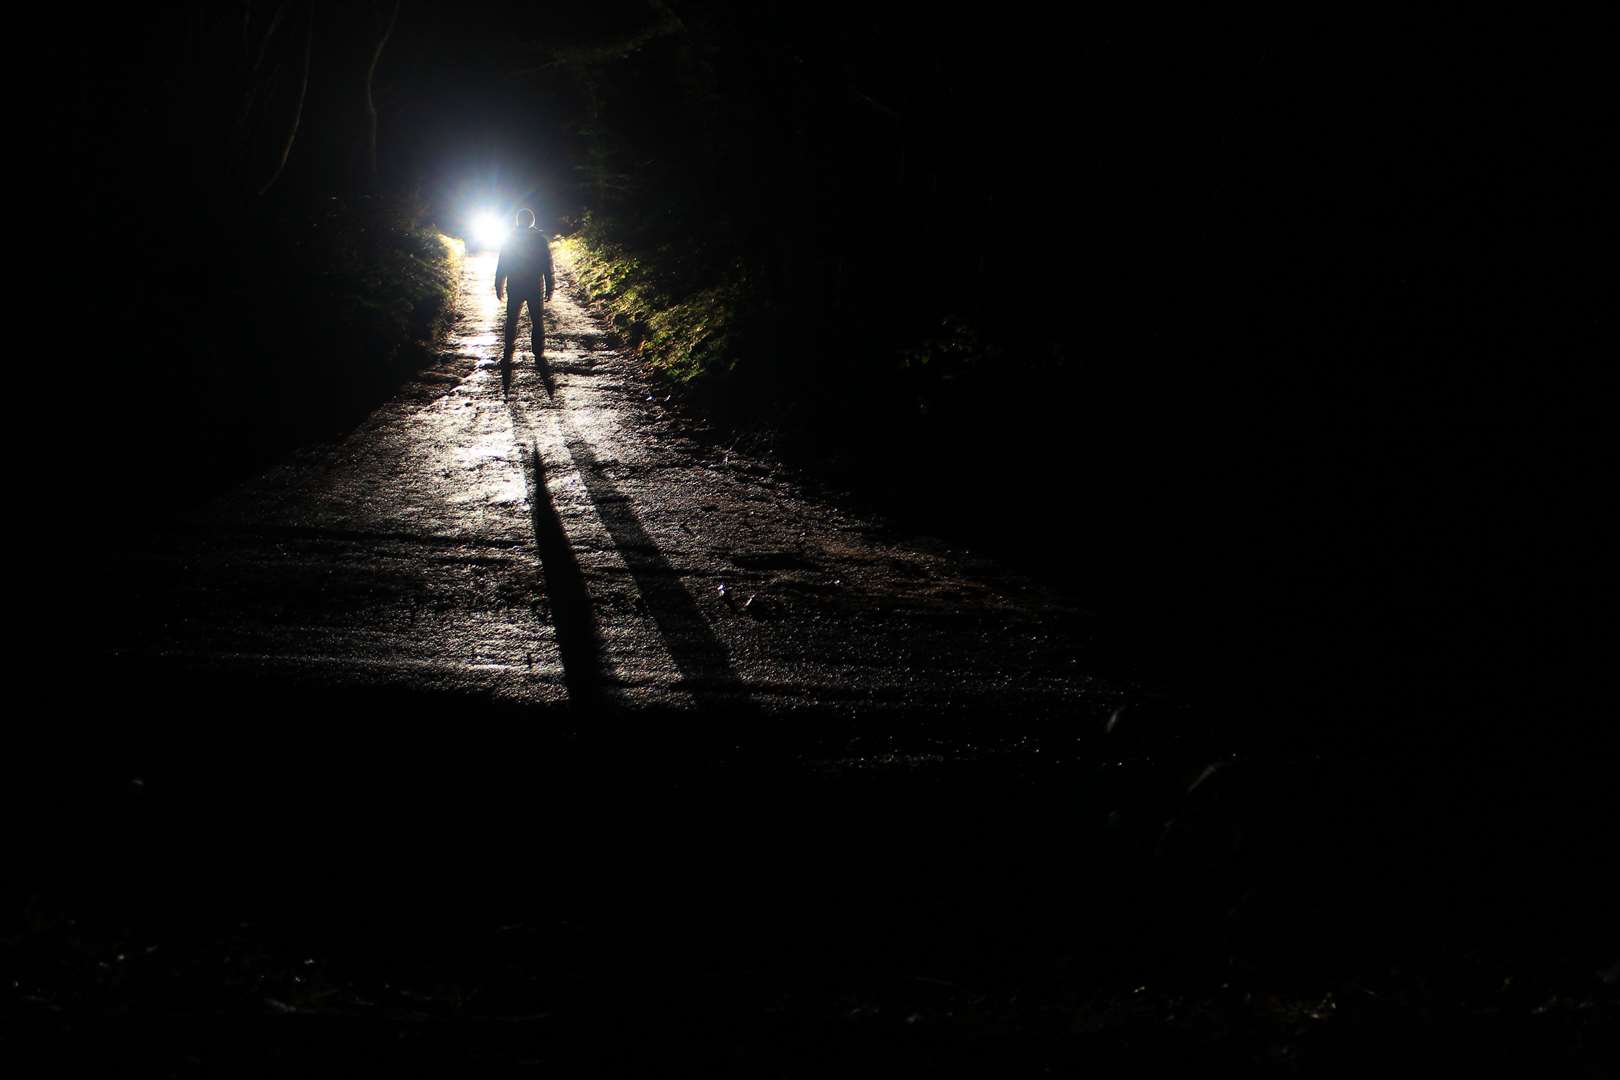 A number of Kent's roads are believed to be haunted